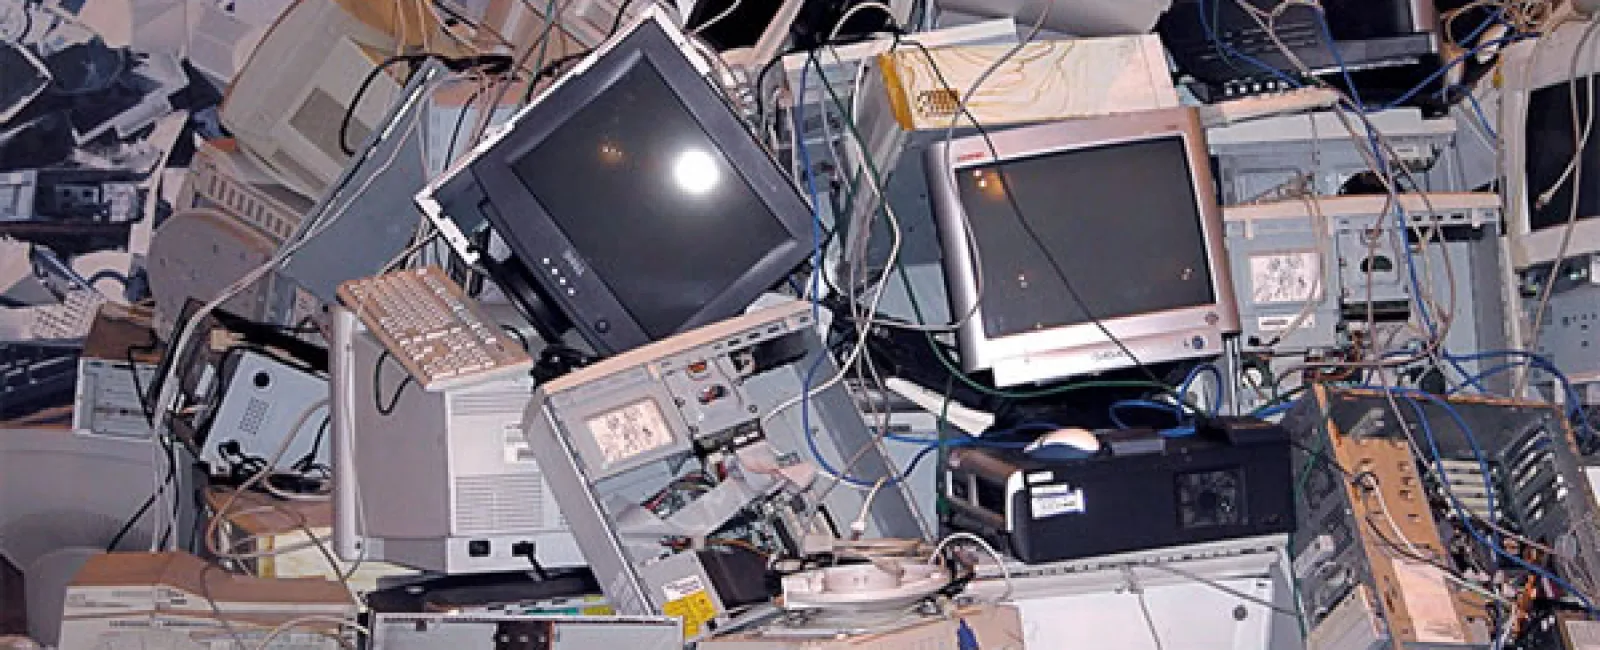 How to Recycle Used Commercial Electronics.